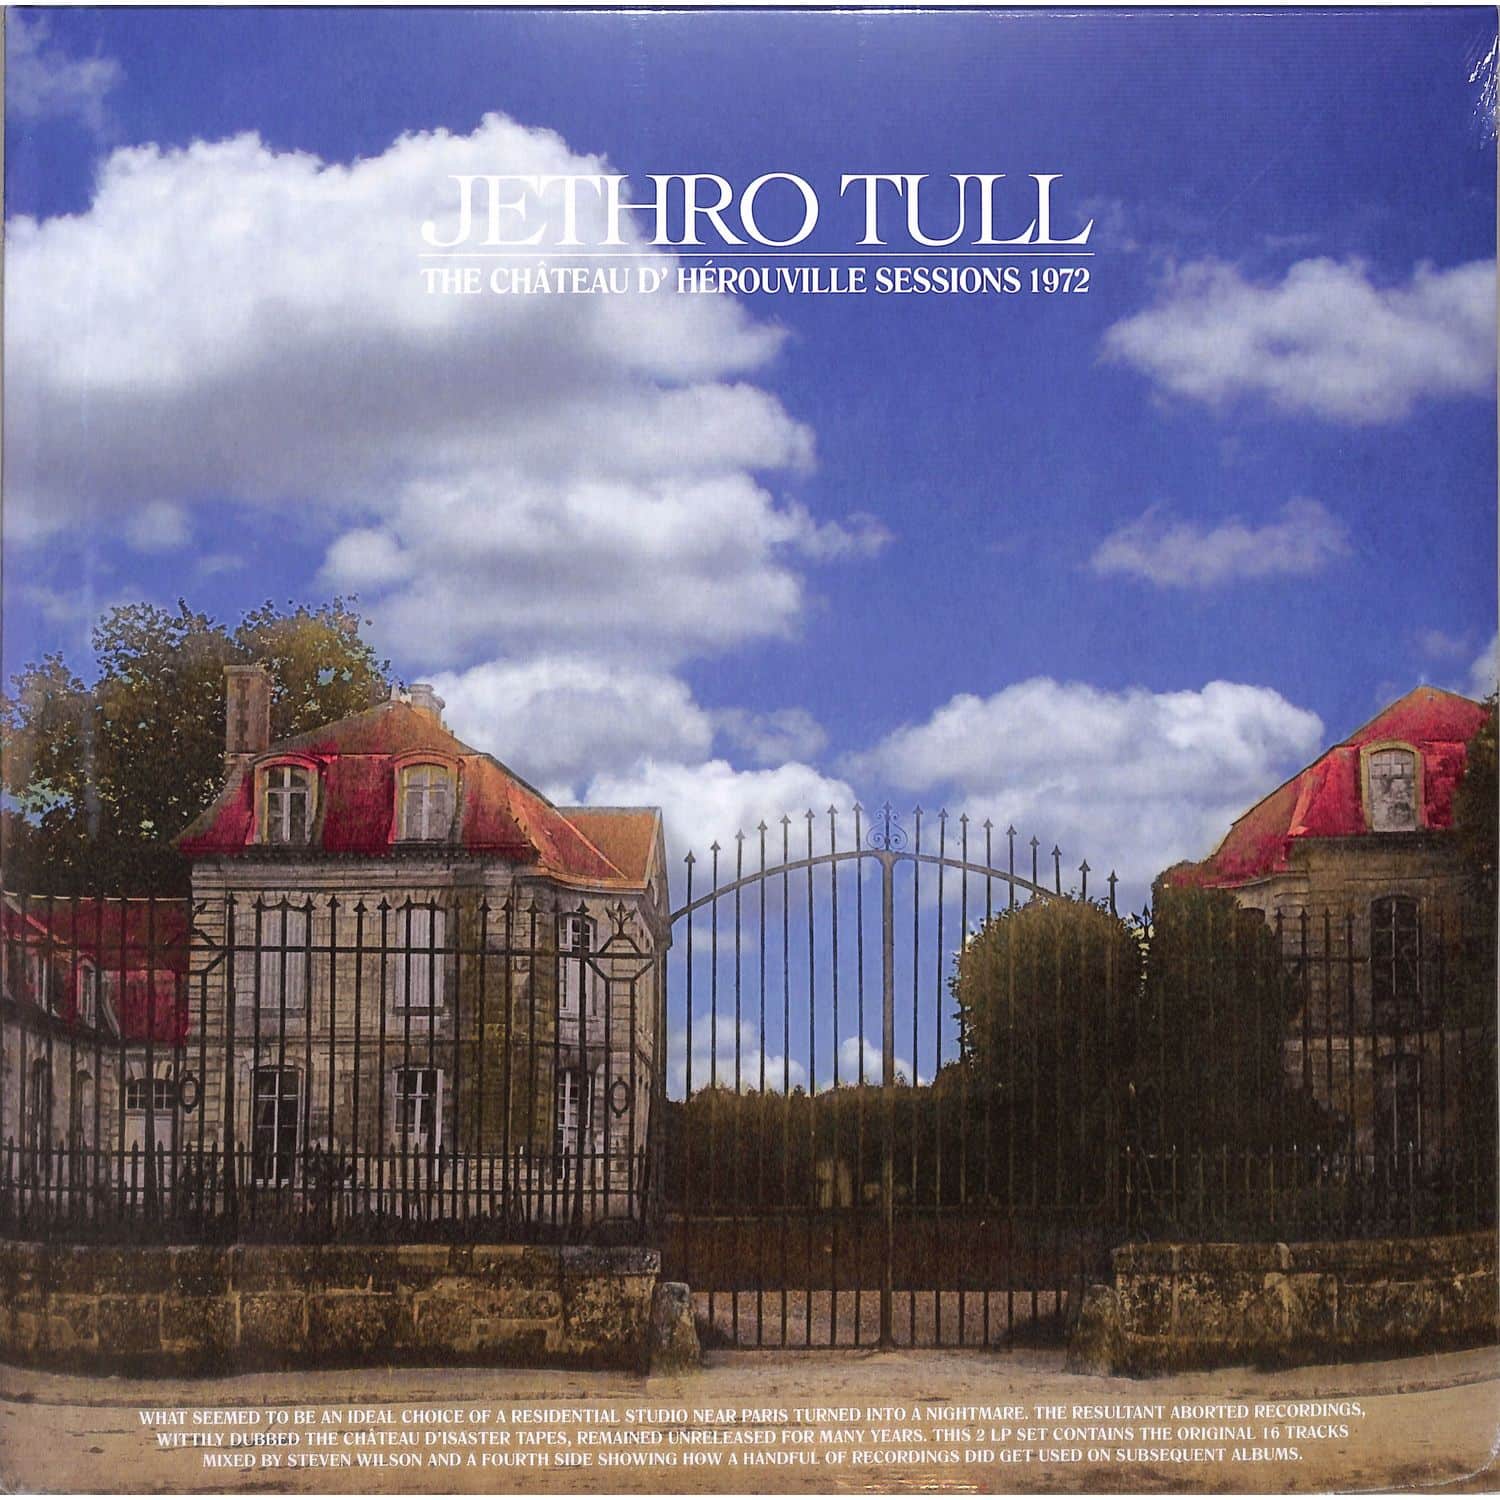 Jethro Tull - THE CHATEAU D HEROUVILLE SESSIONS 